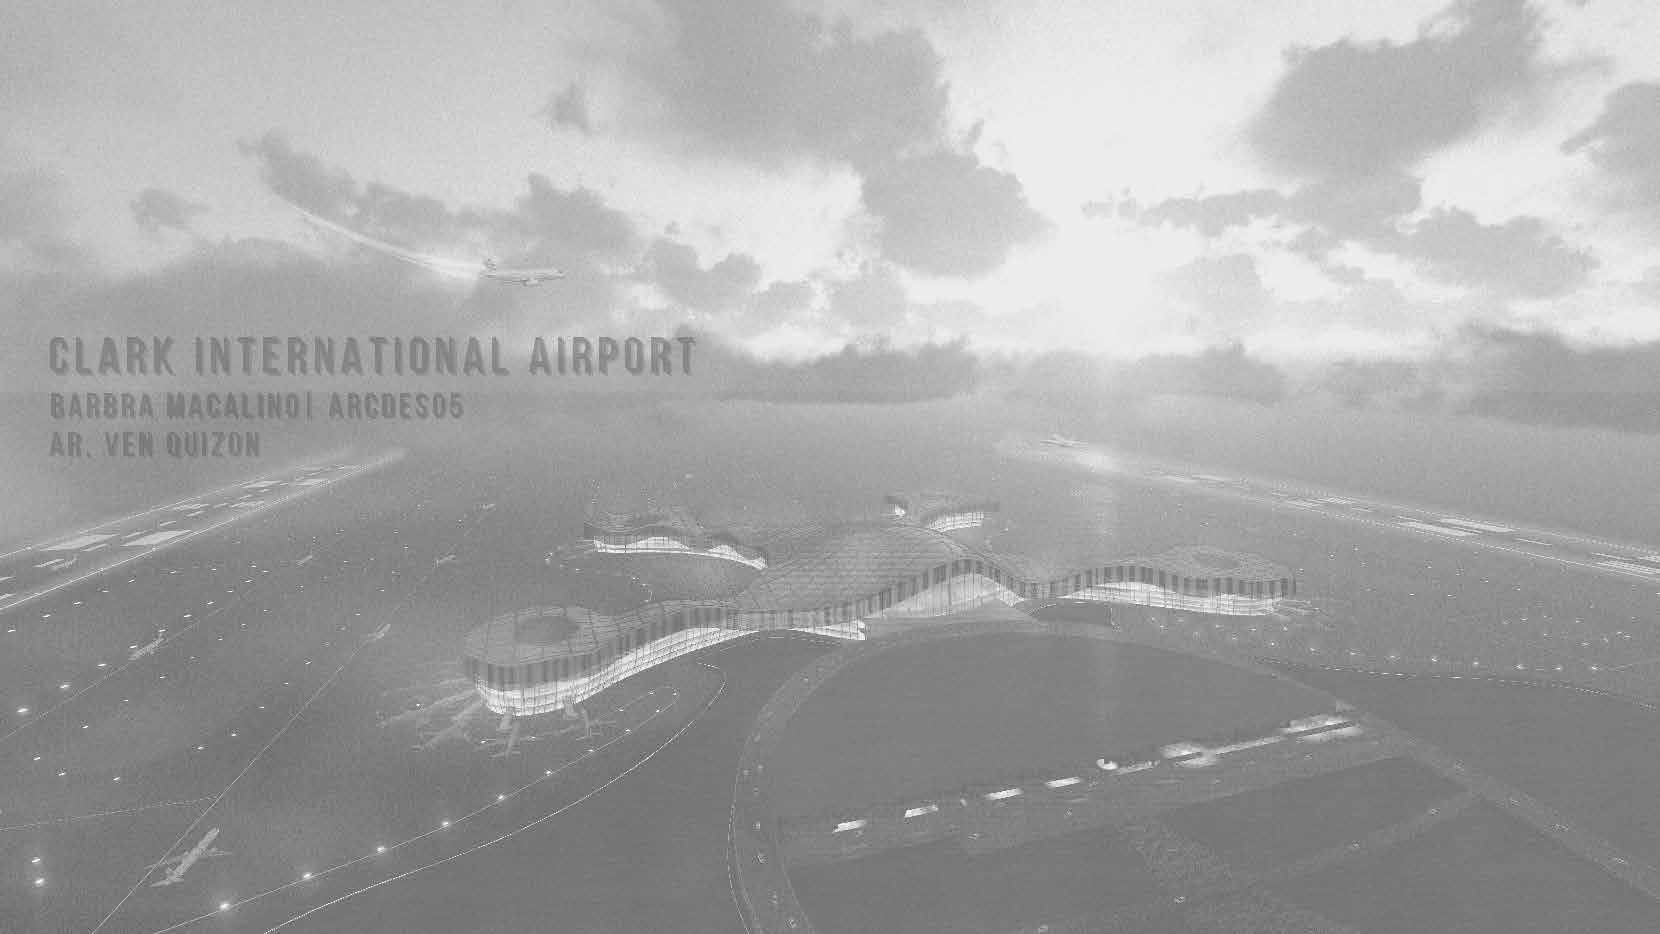 You are currently viewing ARCDS05 Clark International Airport by MACALINO, BARBRA